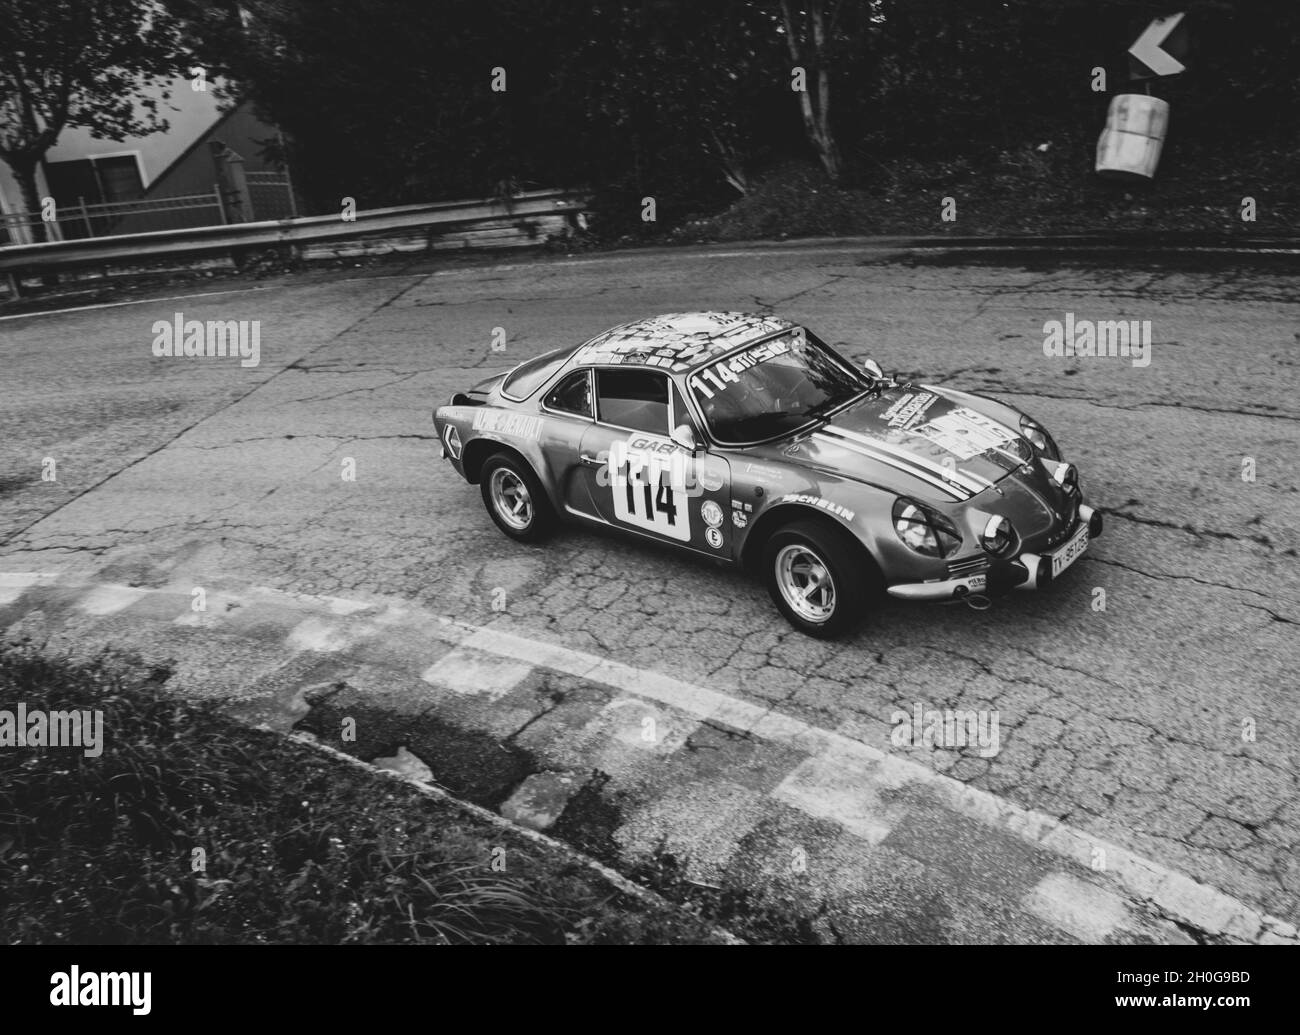 Renault alpine a110 Black and White Stock Photos & Images - Alamy